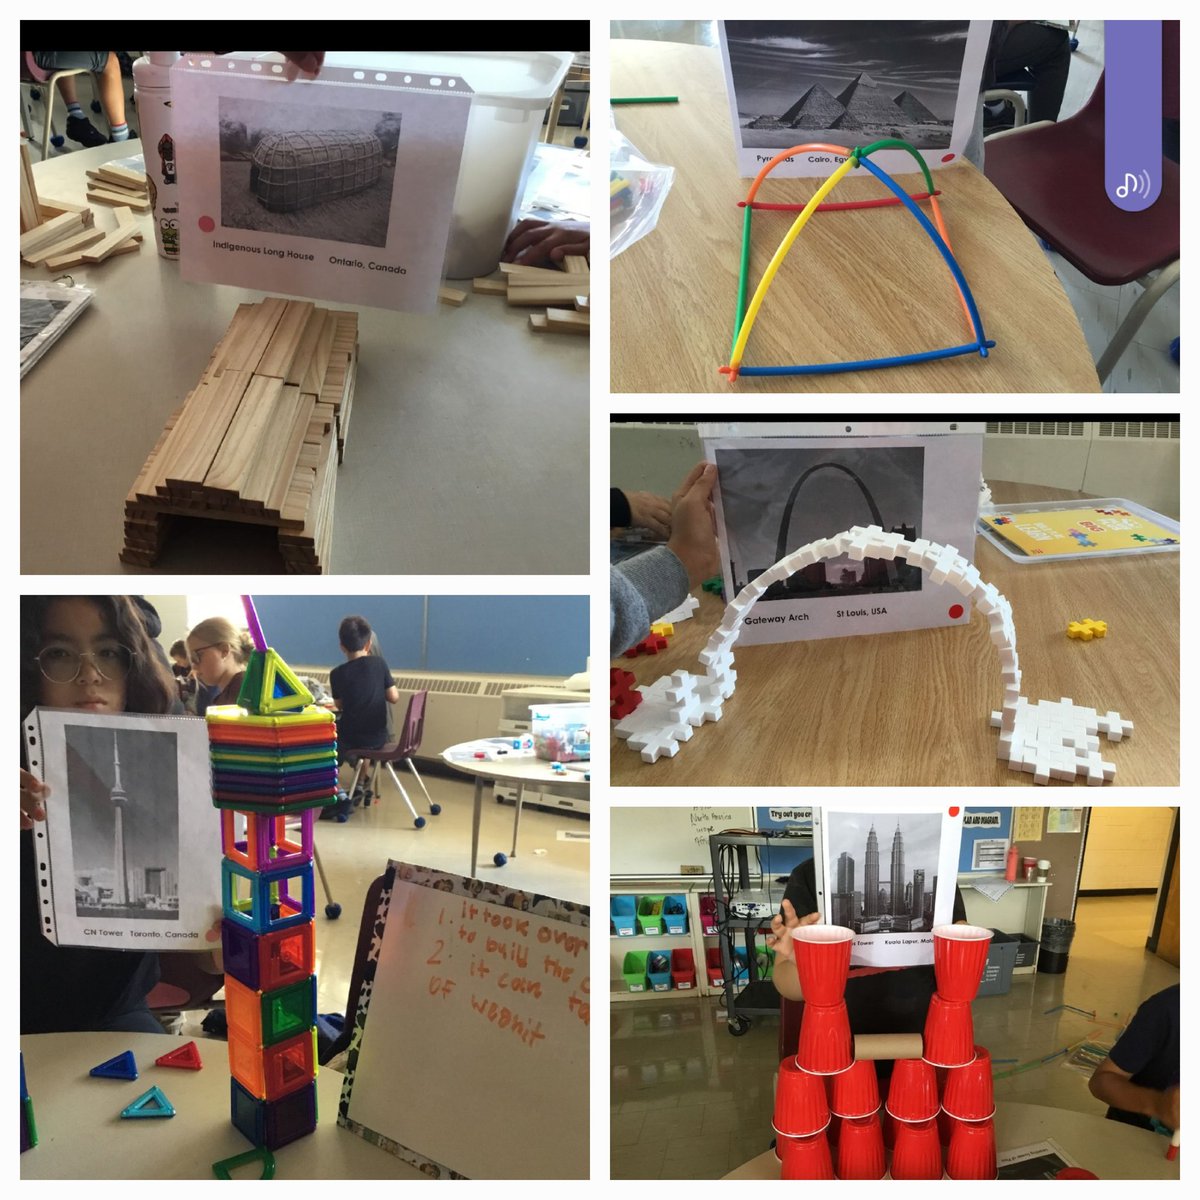 Our primary and junior classes read the book 'Dreaming Up'. Then Cassandra engineers built notable structures from around the world using various materials. Can you recognize any of our structures? @Cassandra_PS @LC2_TDSB